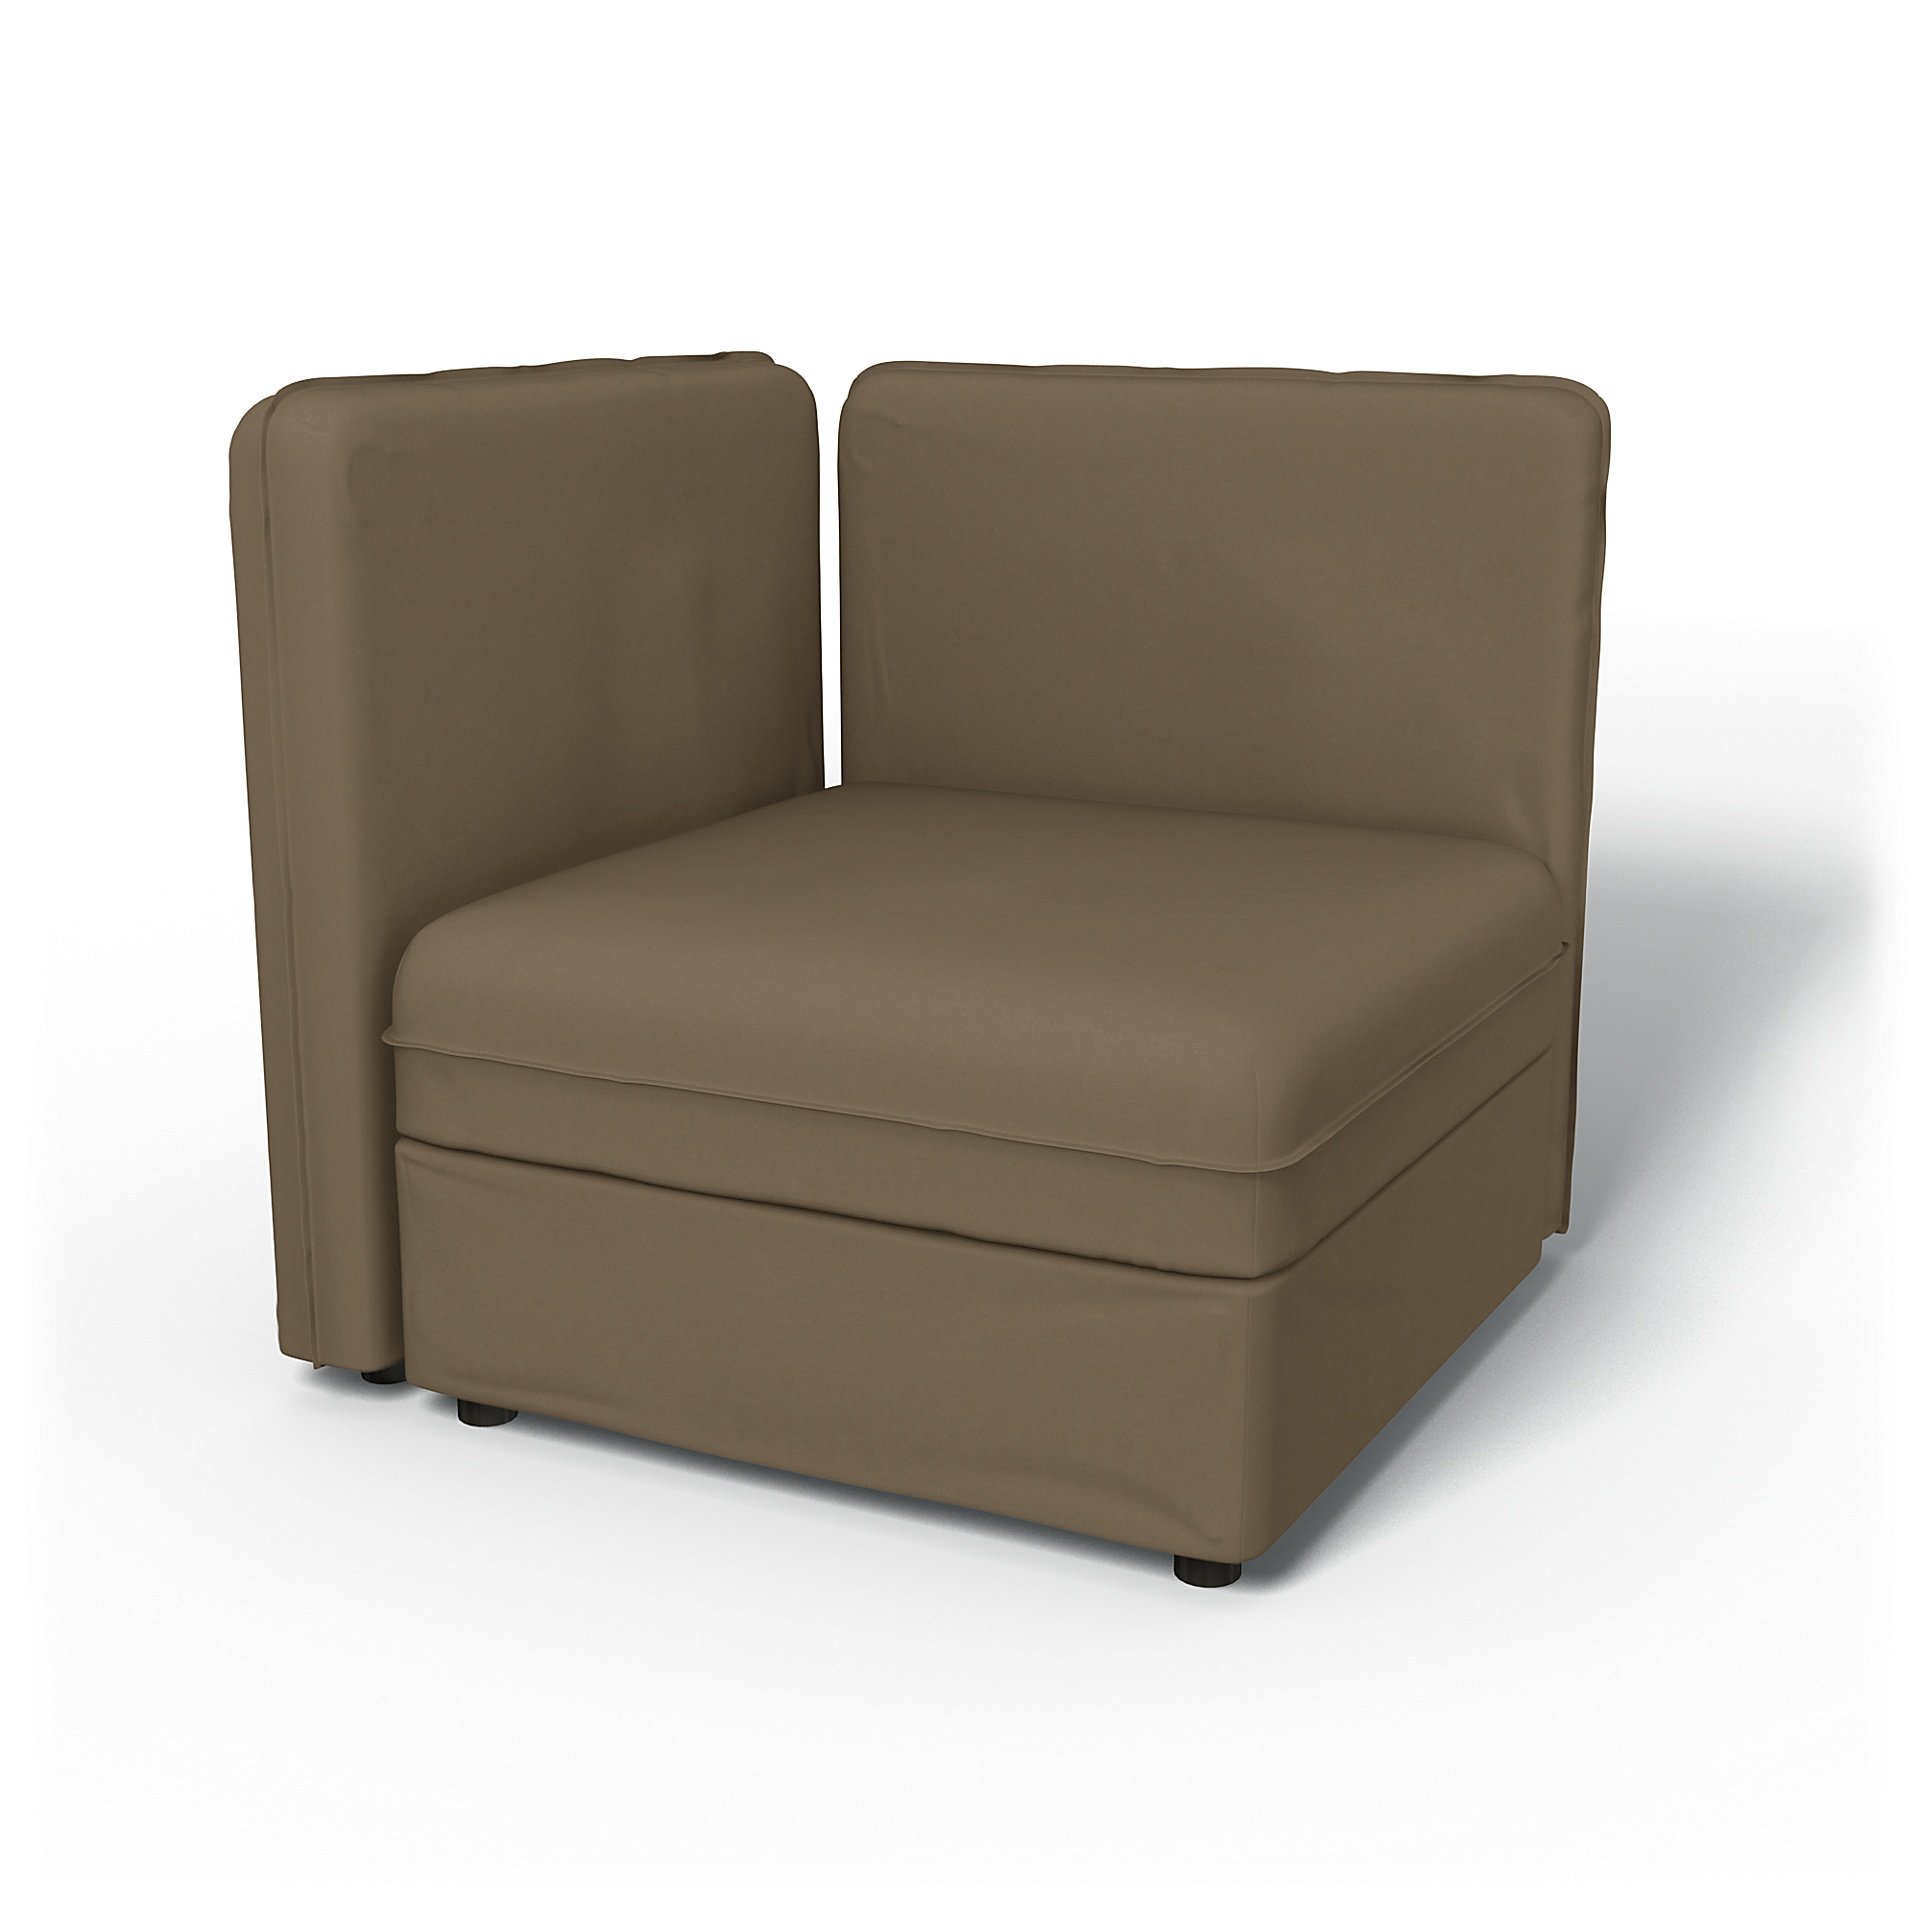 IKEA - Vallentuna Seat Module with Low Back and Storage Cover 80x80cm 32x32in, Taupe, Velvet - Bemz